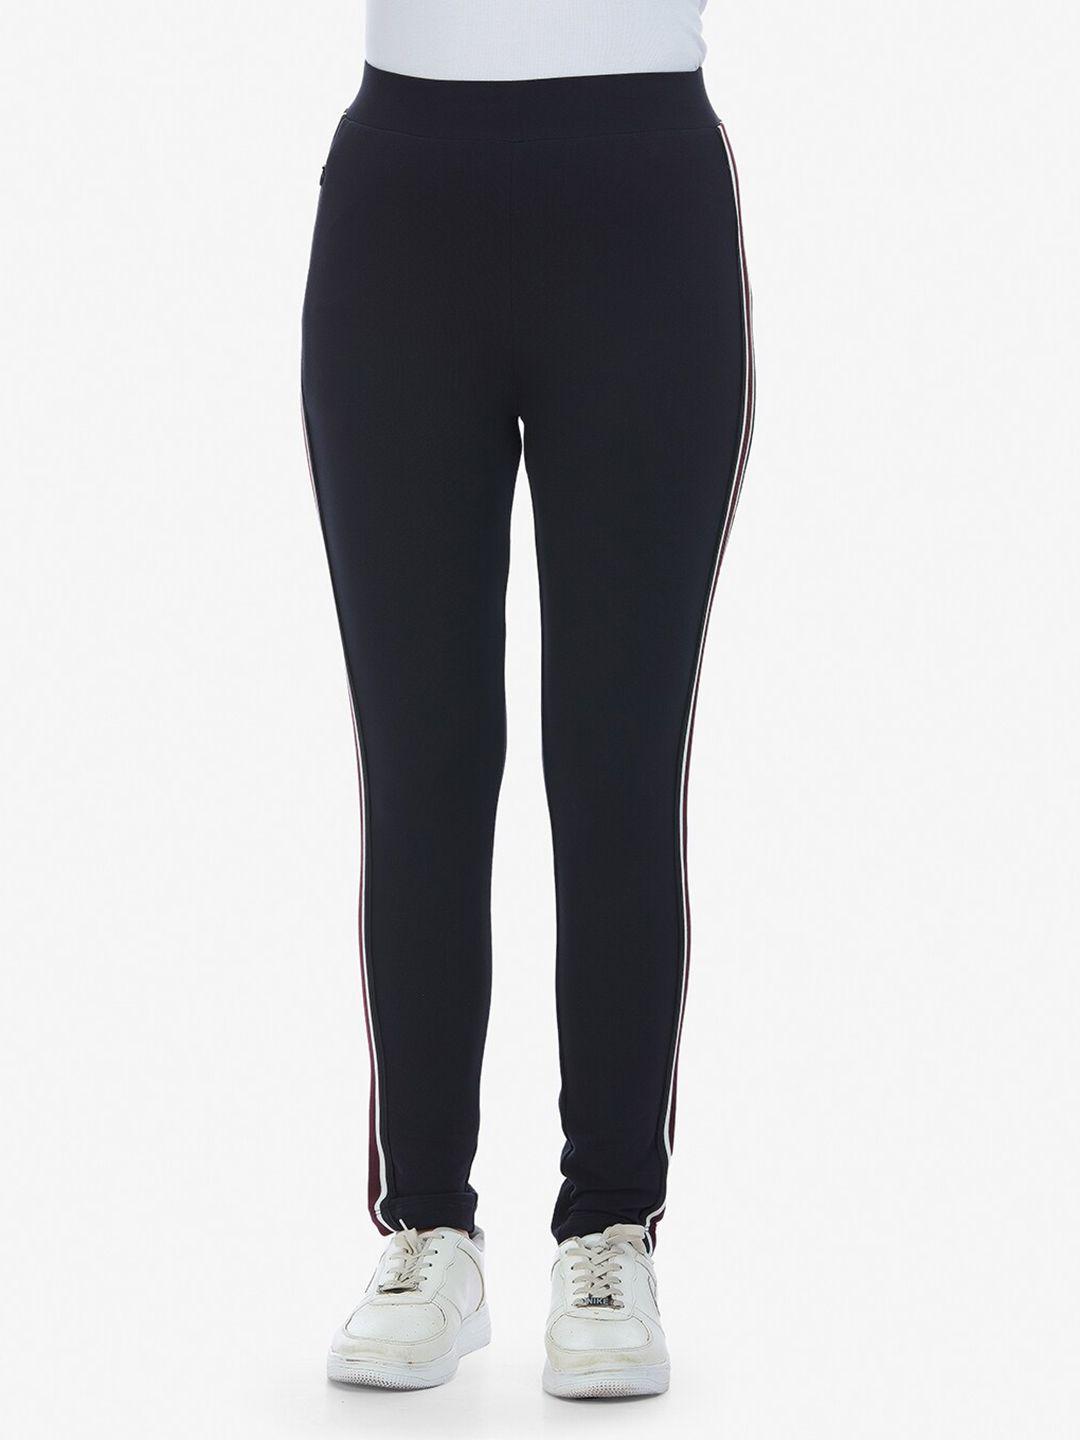 maysixty women mid-rise track pant